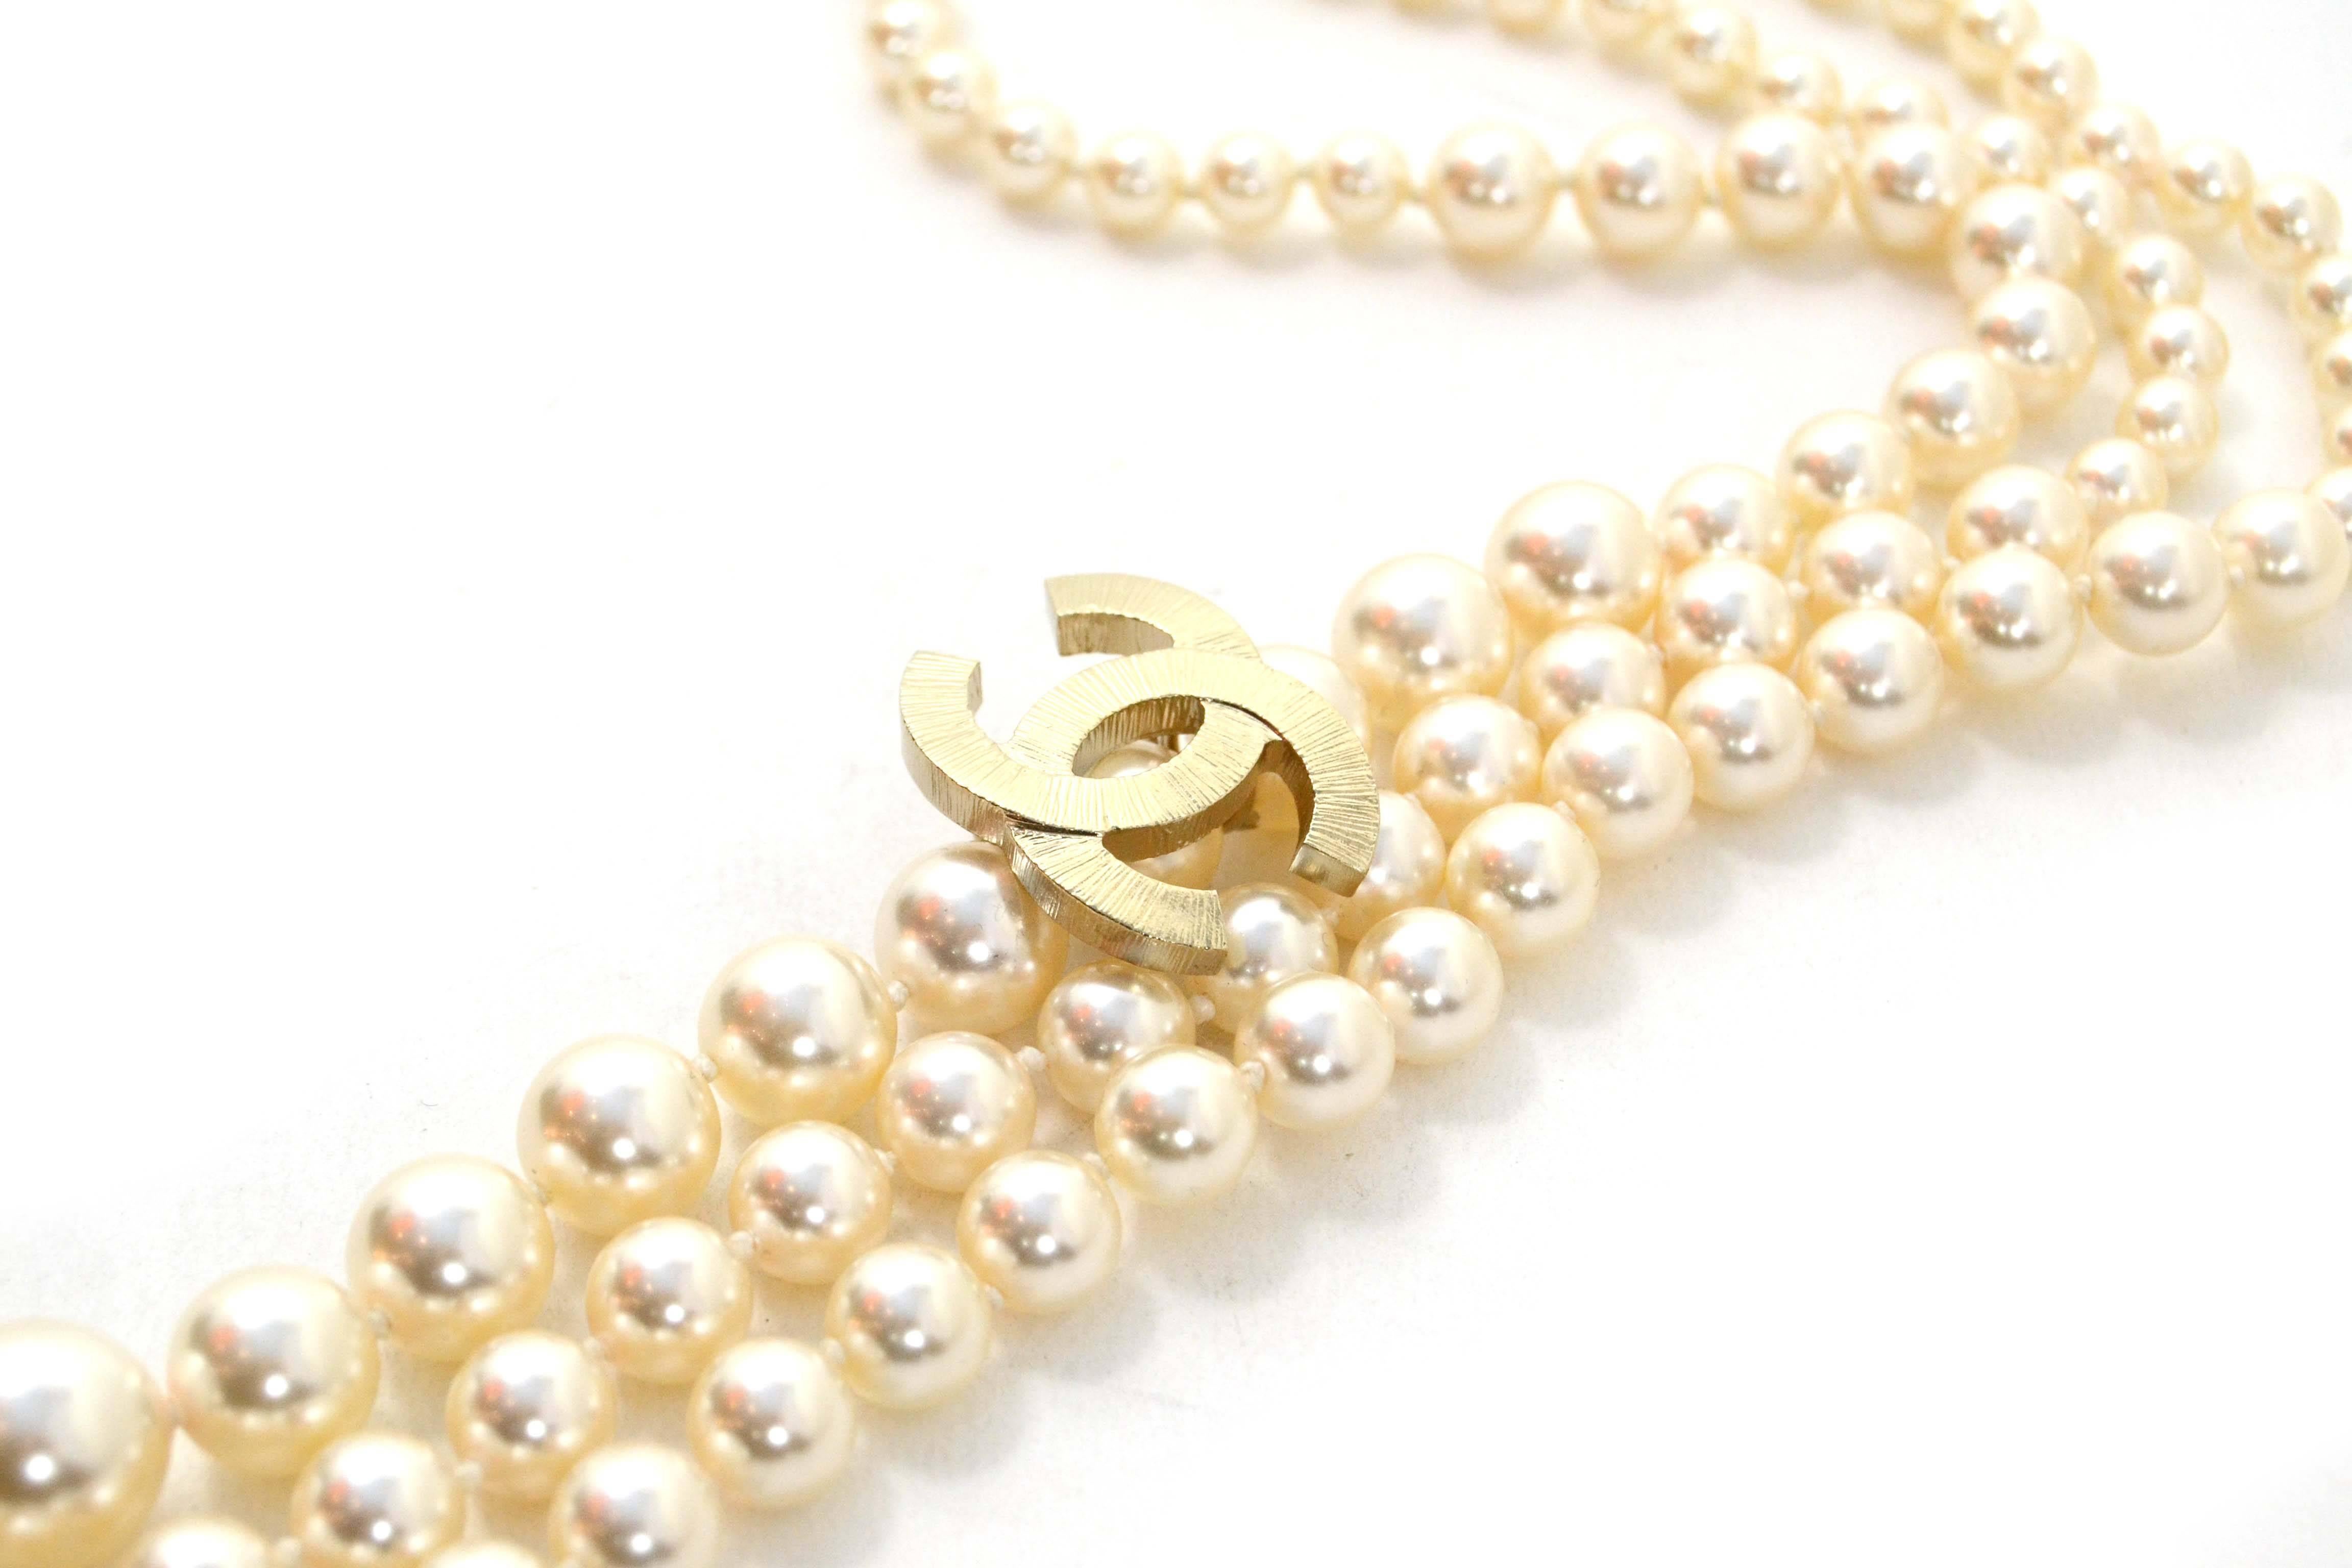 Chanel Three-Strand Graduated Pearl Necklace
Features CC pendant on front of necklace as well as at back neck closure
Made In: Italy
Year of Production: 2014
Color: Ivory
Materials: Faux pearl and metal
Closure: Lobster claw clasp
Stamp: B14